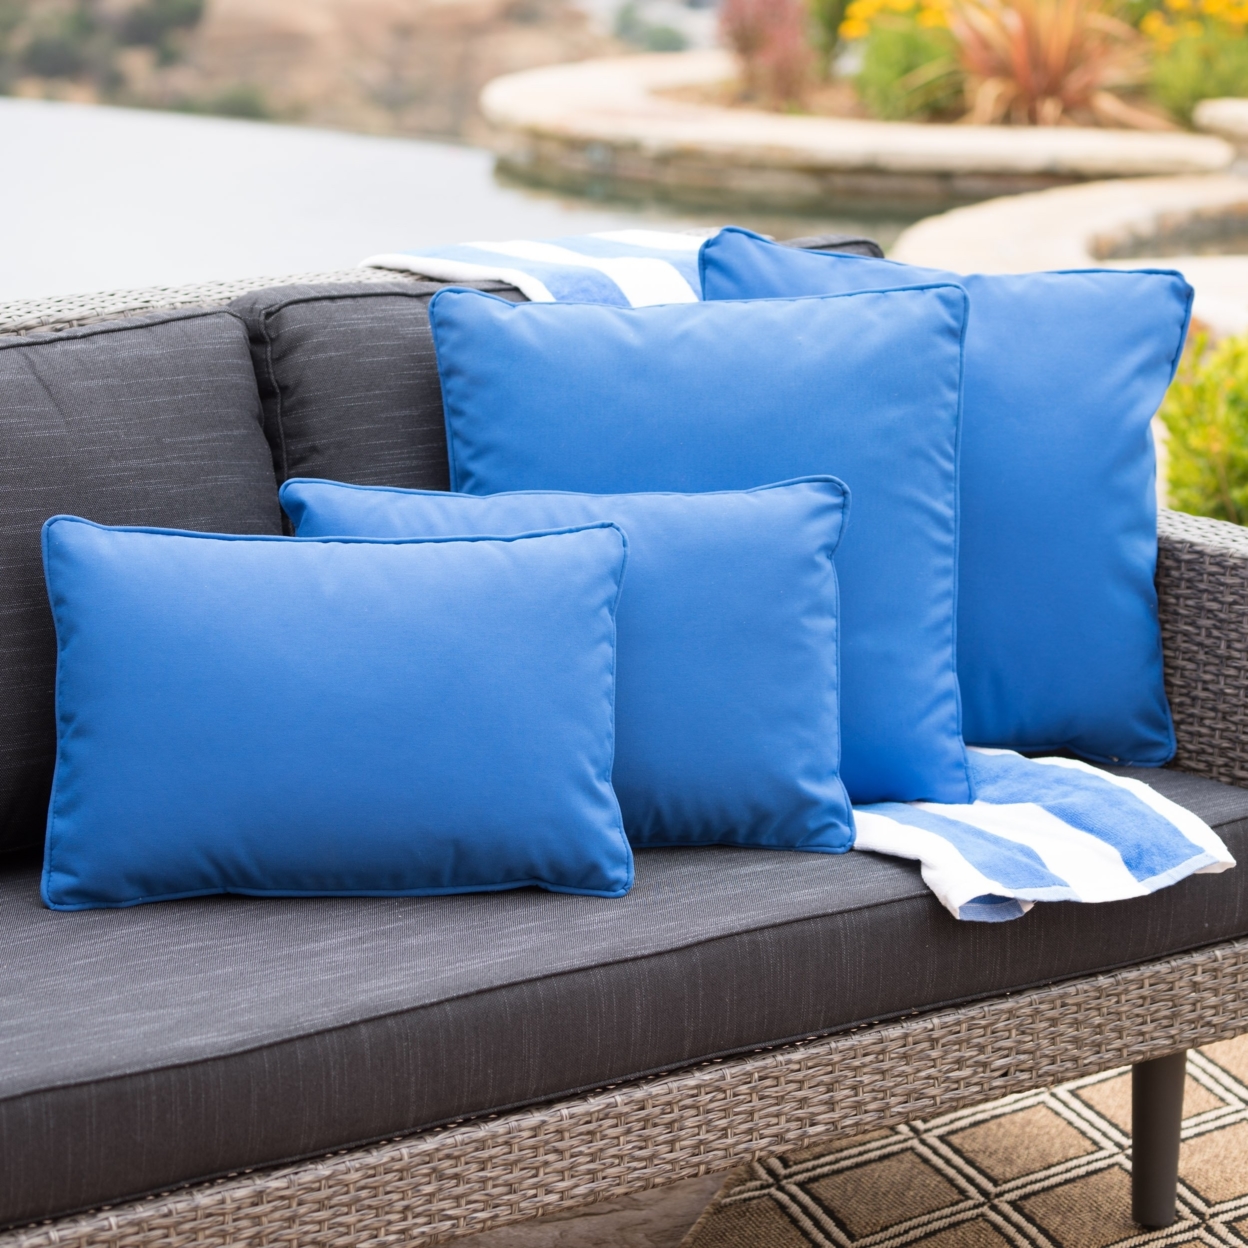 Corona Outdoor Patio Water Resistant Pillow Sets - Teal, Set Of 3